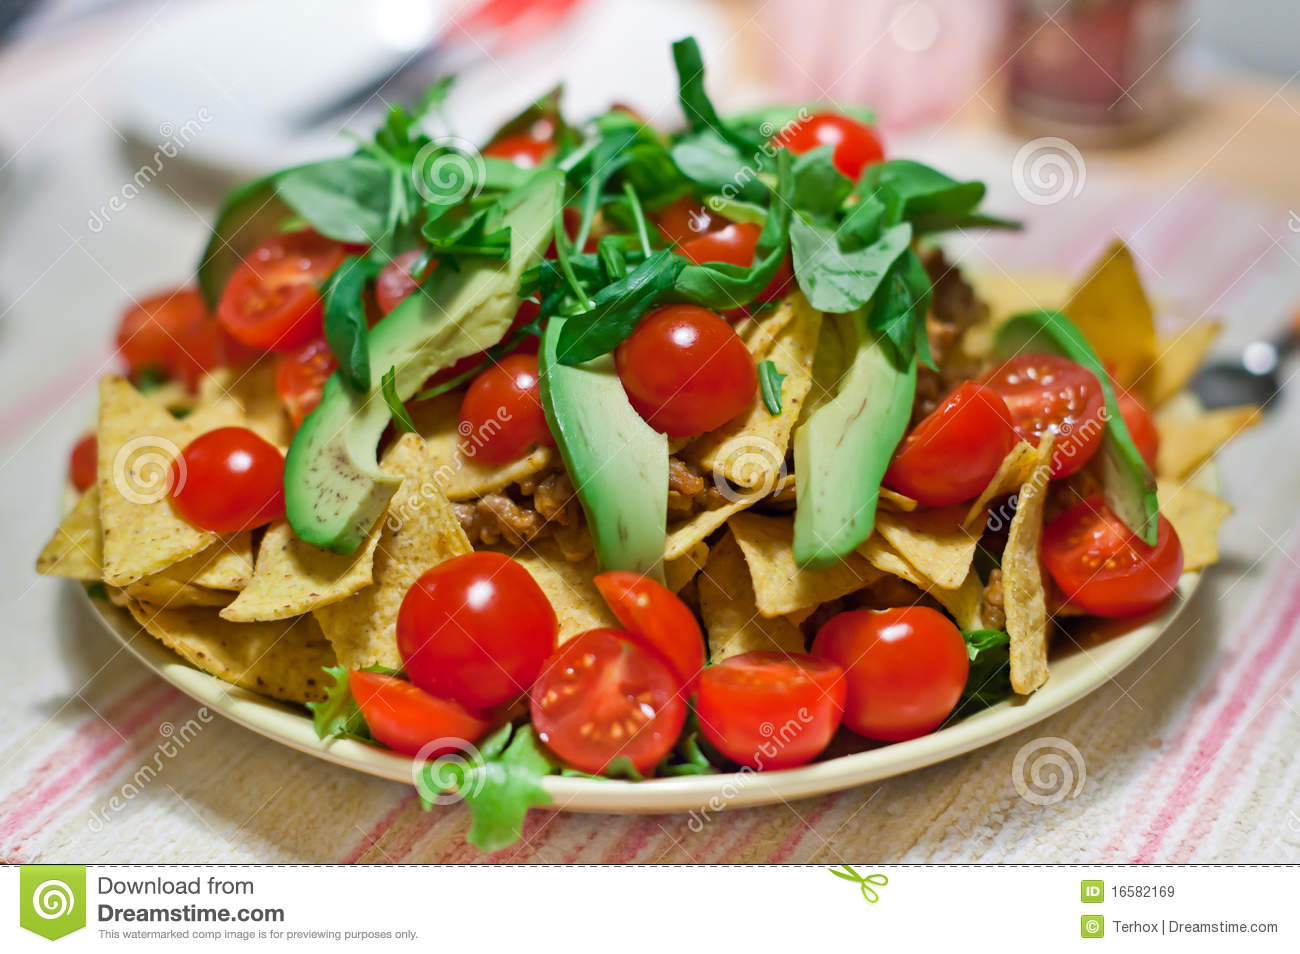 Overfilled Plate Of Food Royalty Free Stock Images   Image  16582169